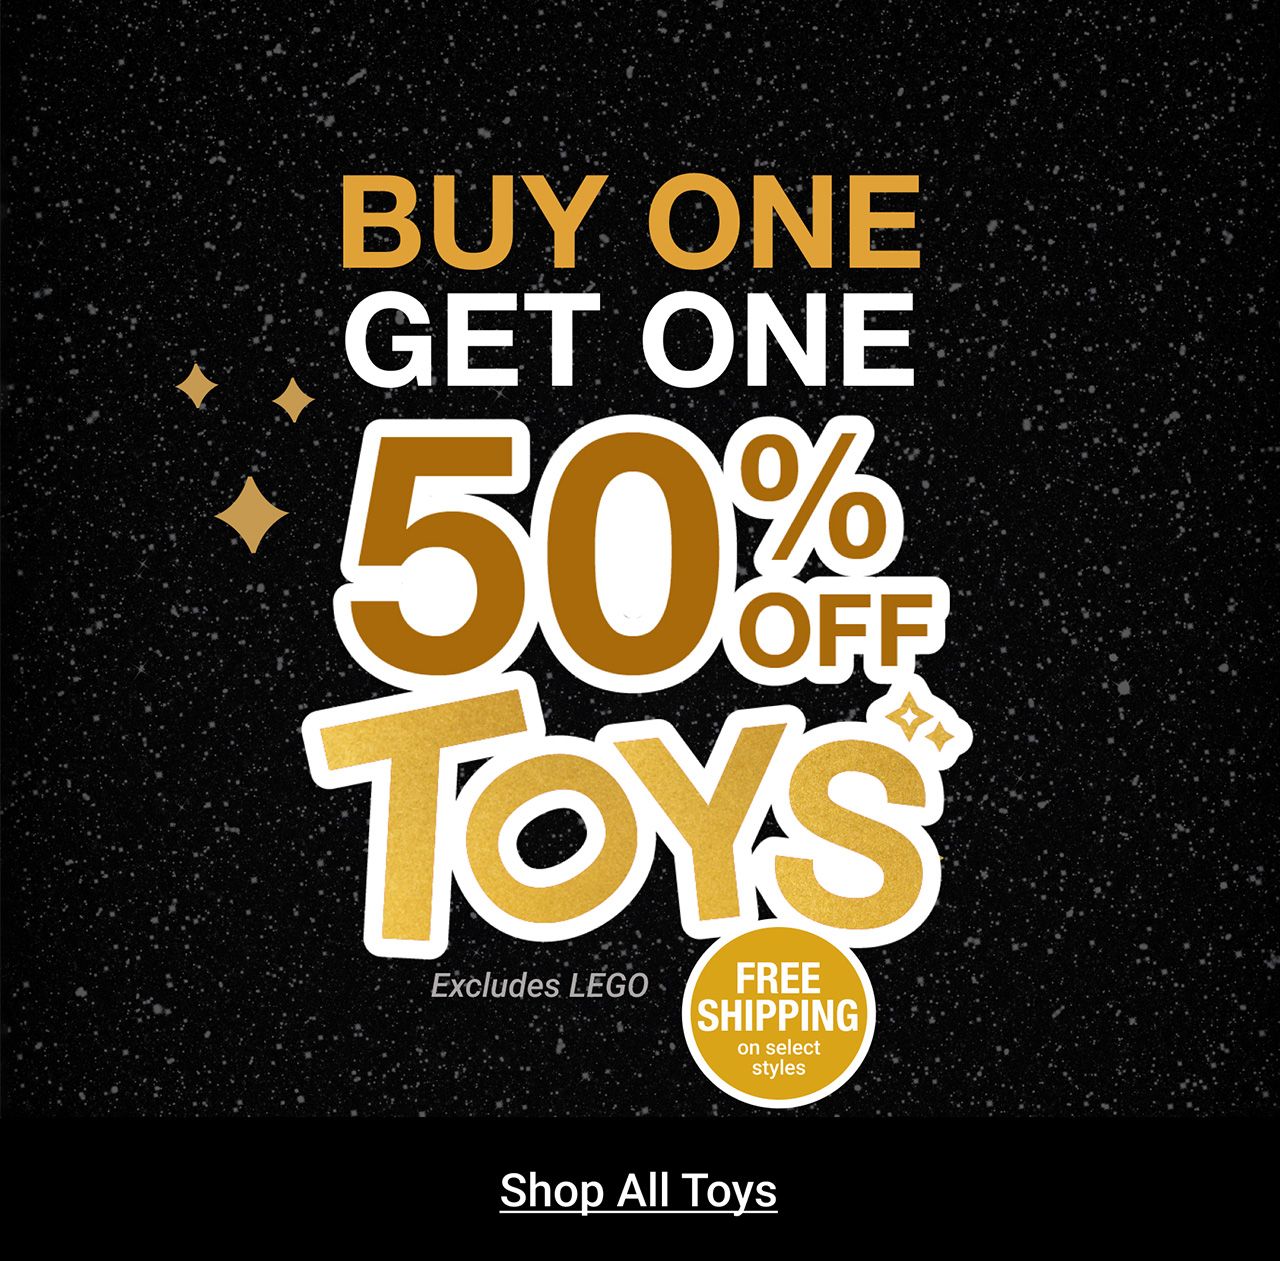 Buy One Get One 50% off Toys at BJ’s